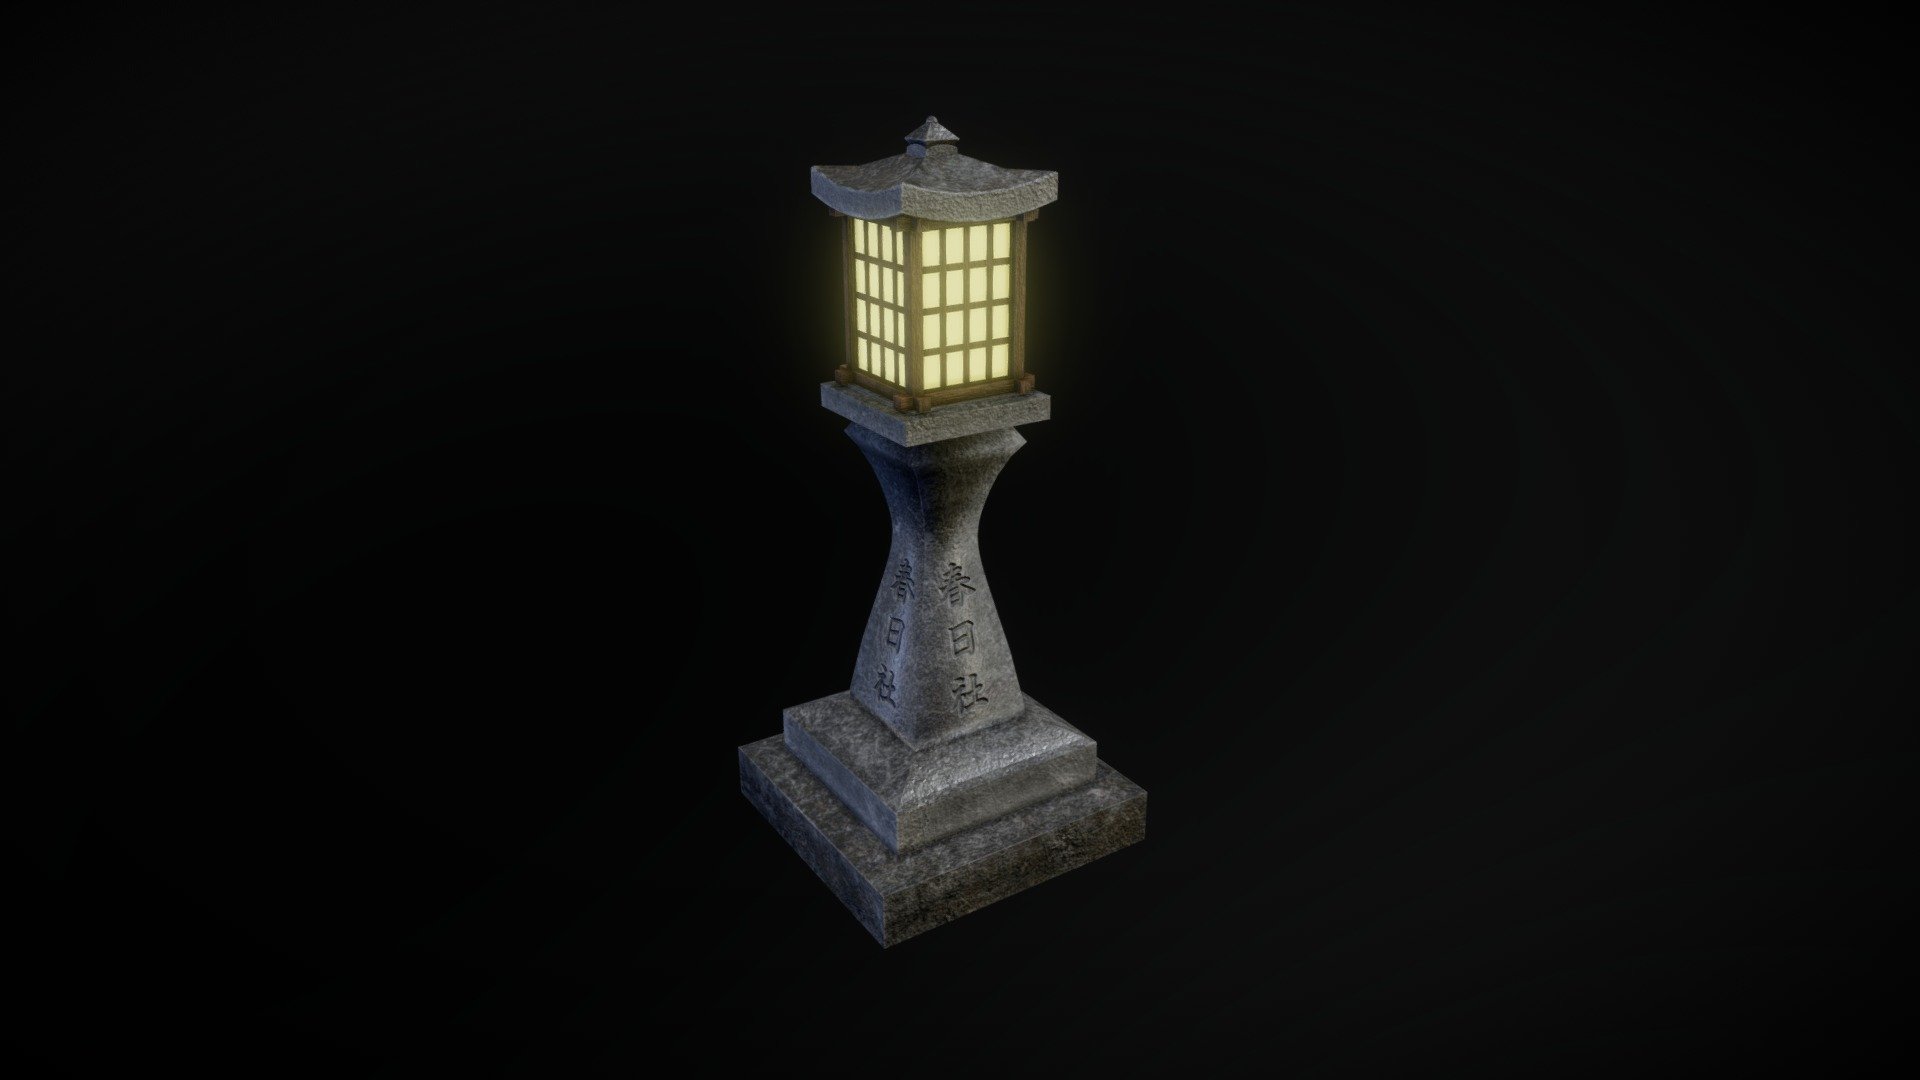 A damp Japanese stone lantern or tōrō found at a remote shrine in the hills of Osaka. Made in Blender and Substance 3d model